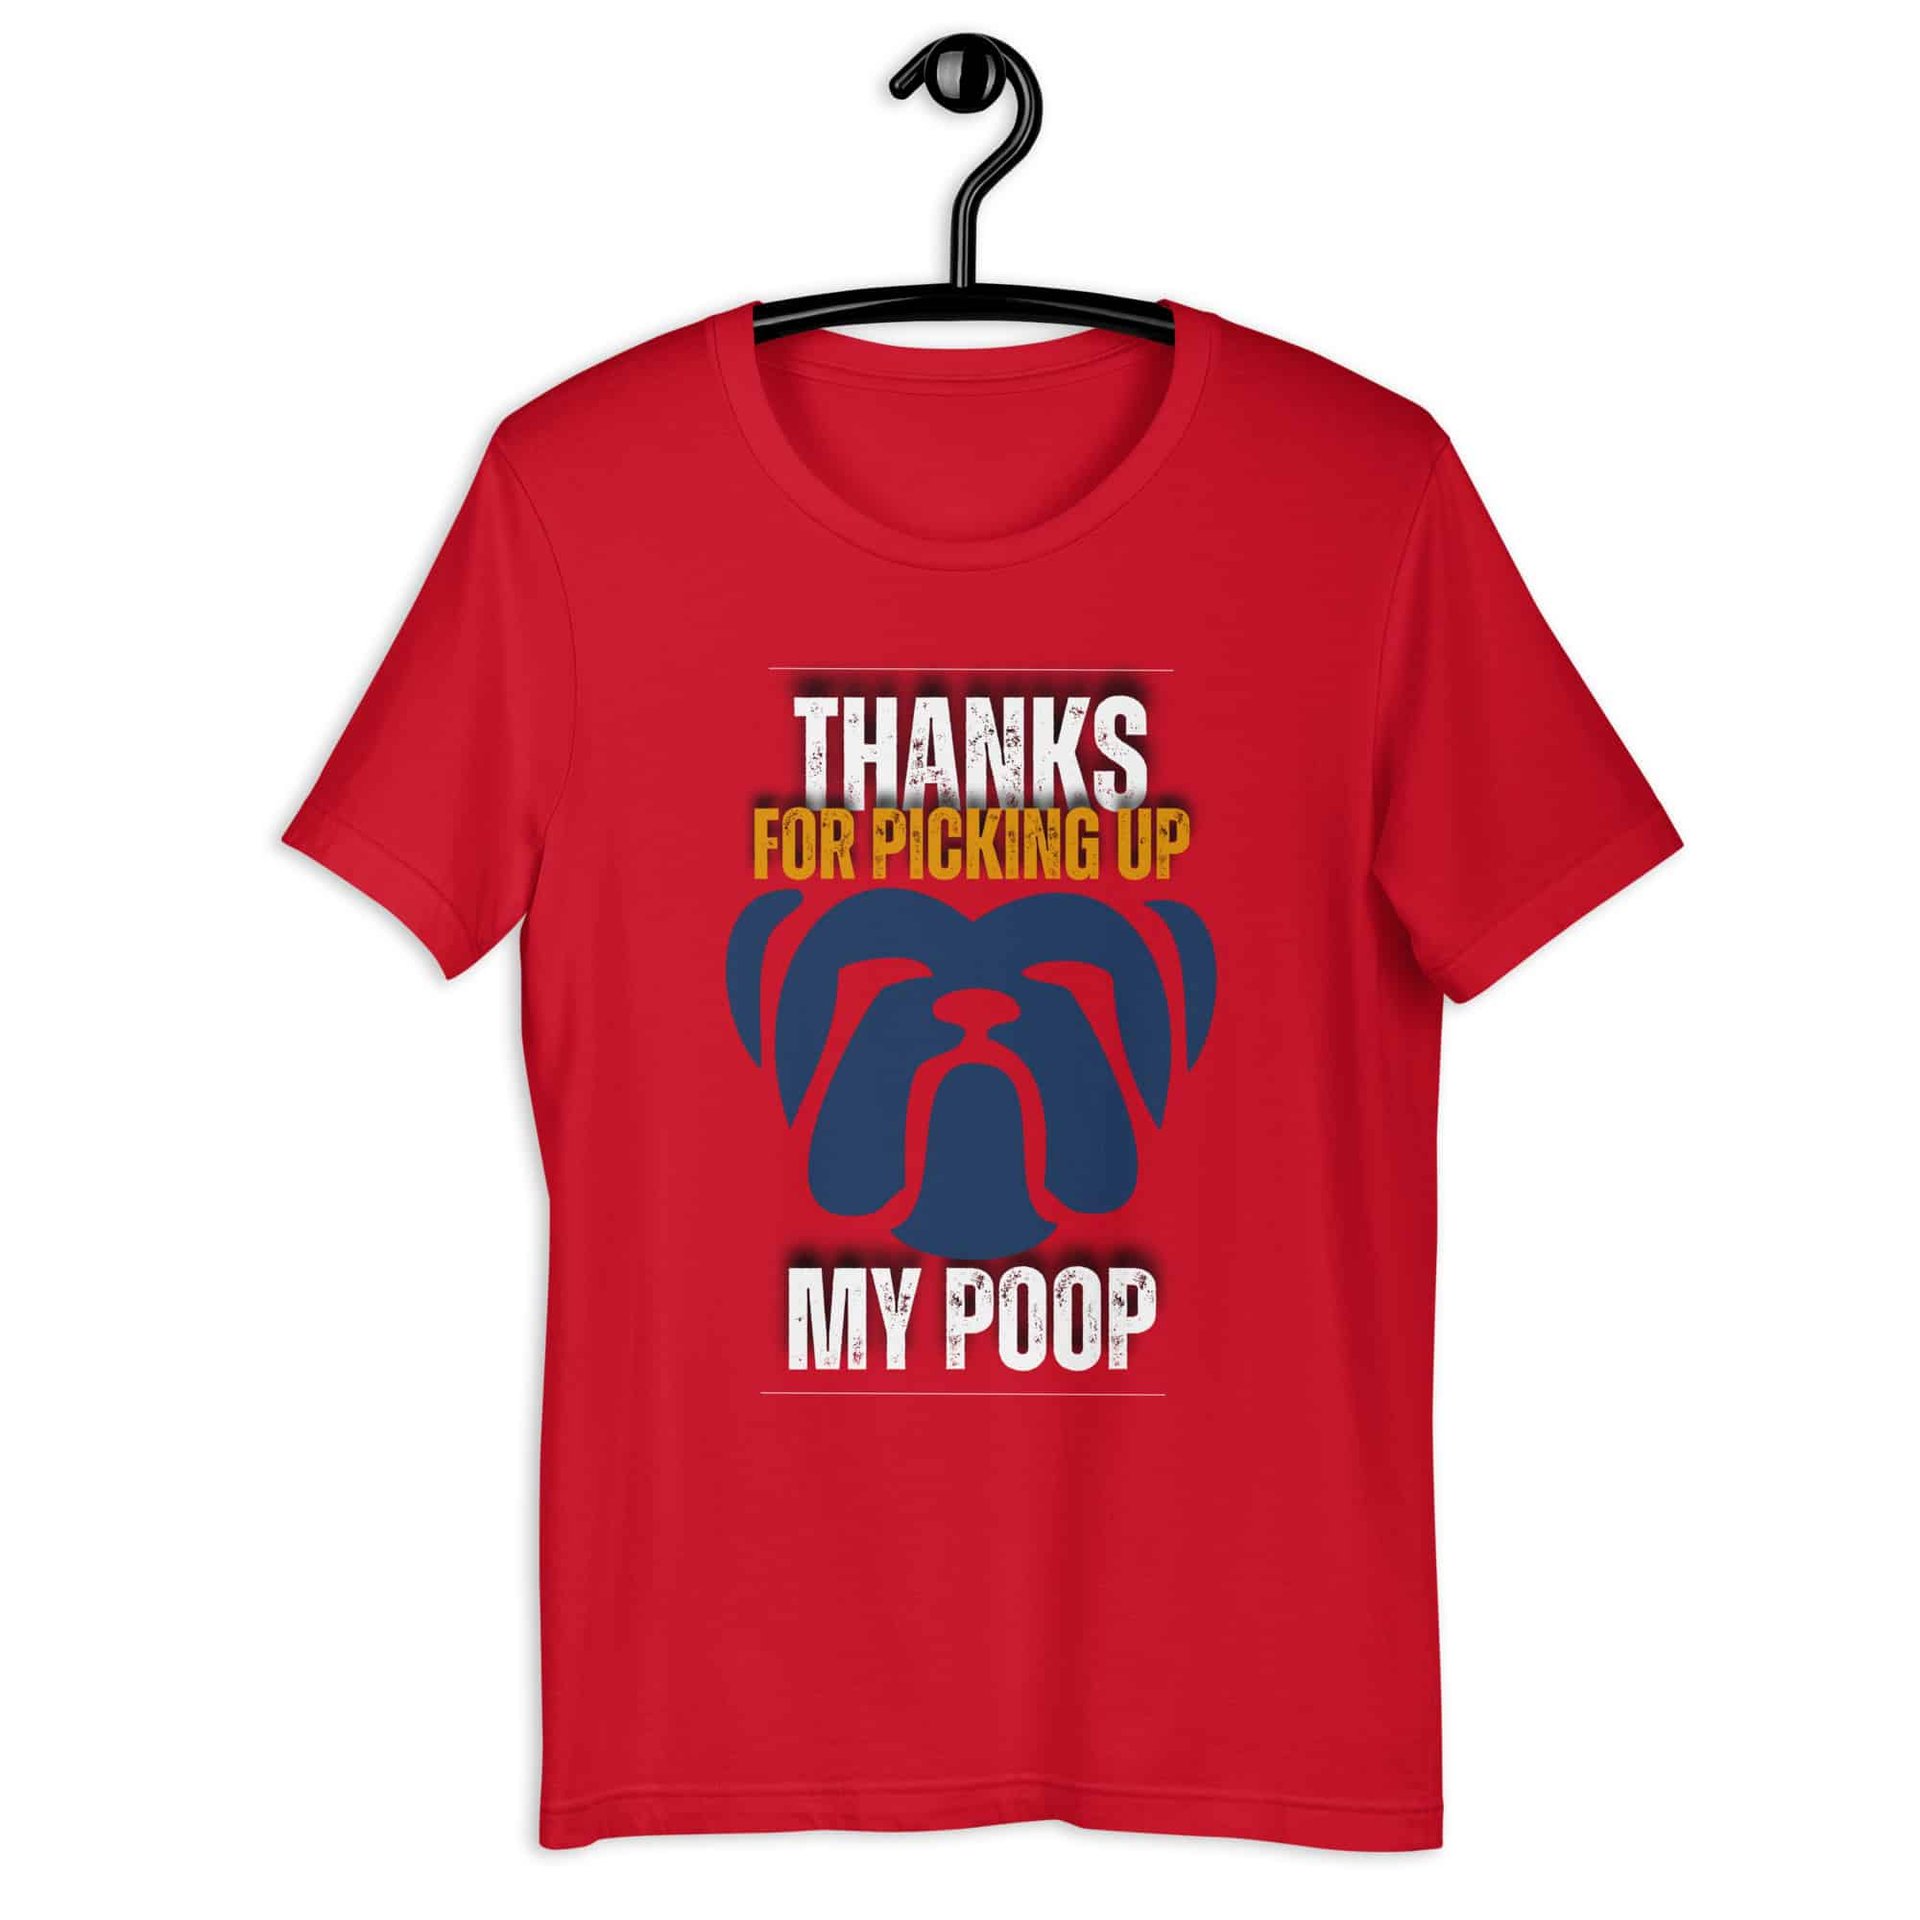 Thanks For Picking Up My POOP Funny Bulldog Unisex T-Shirt. Red